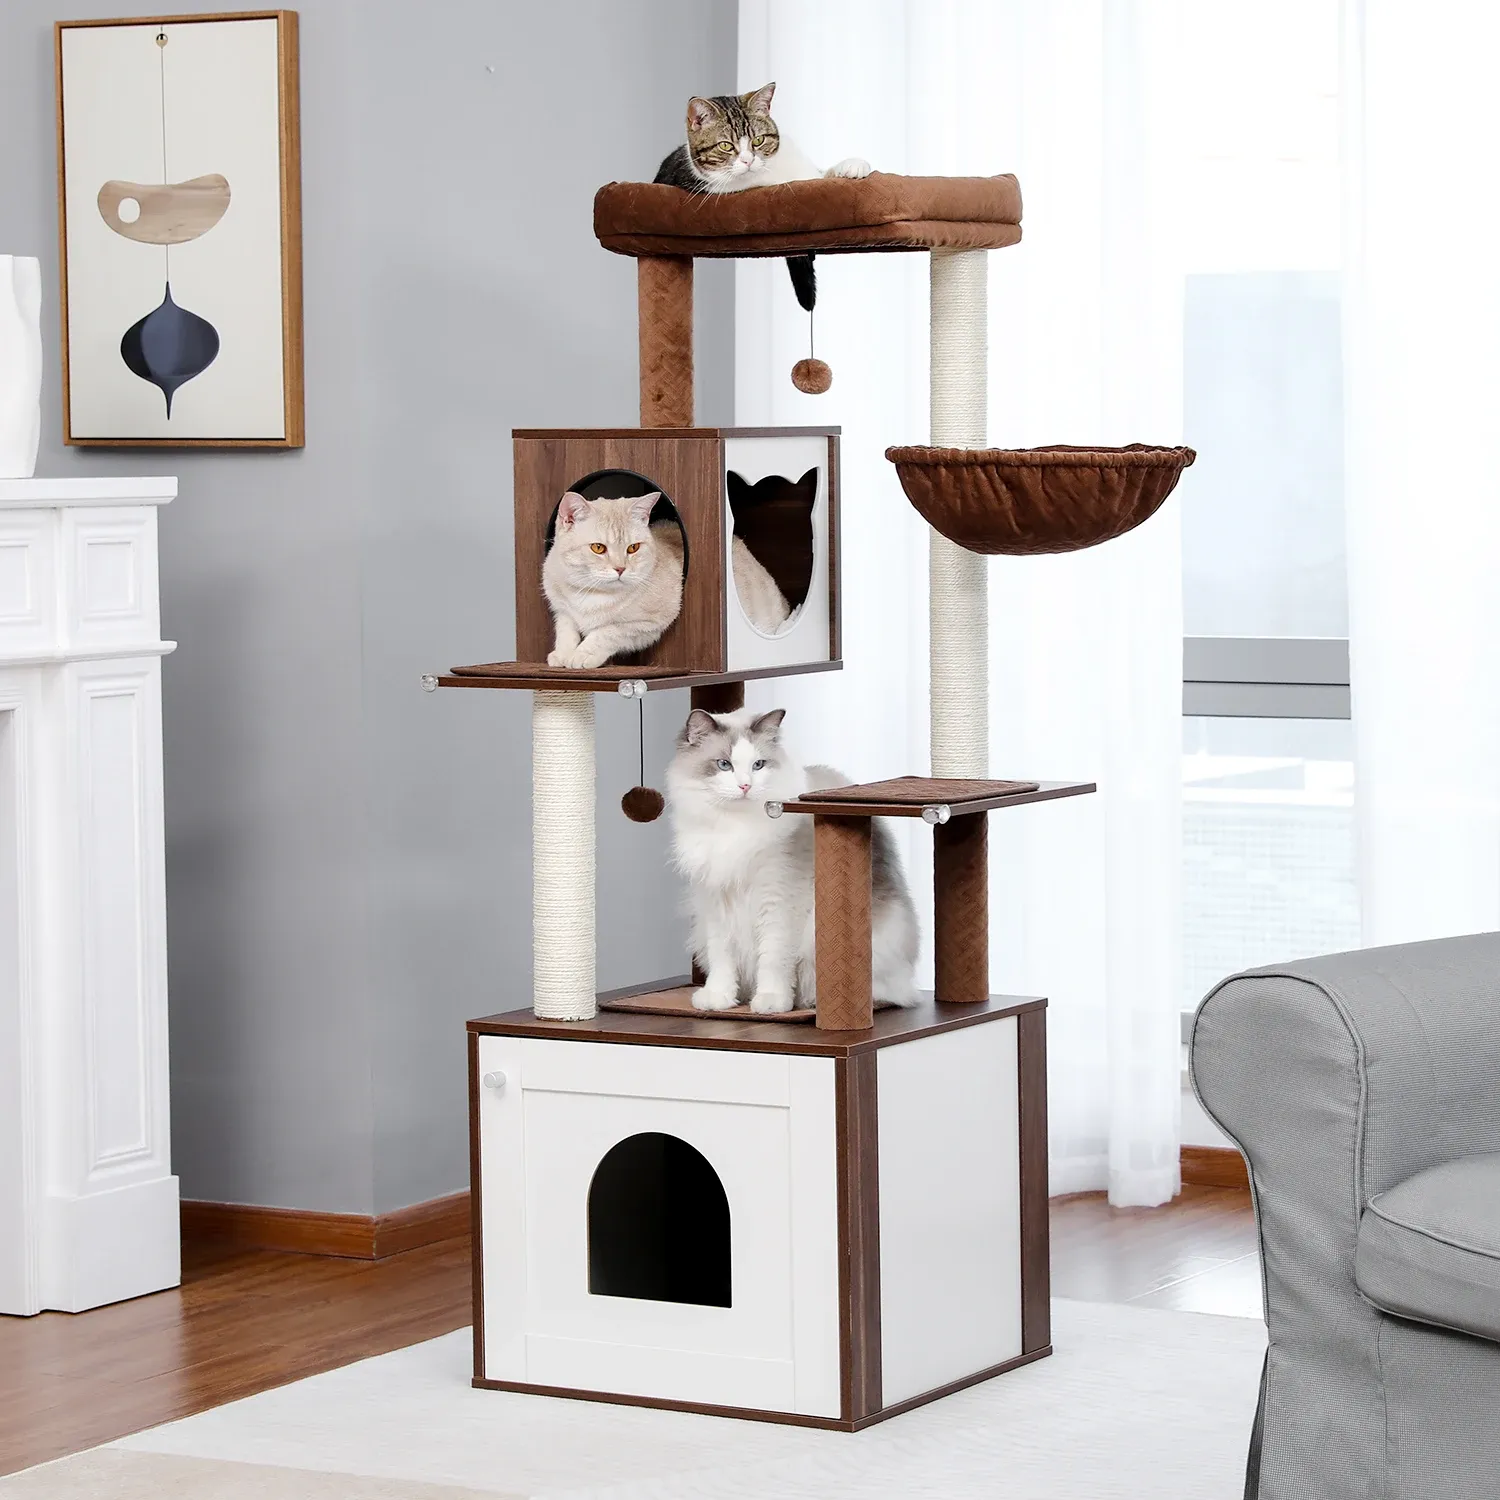 Scratchers Luxury Cat Tree Condo Cabinet MultiLayer Cat Tower Natural Sisal Scratching Post for Feline Large Perch Nest 3 Colors Furniture